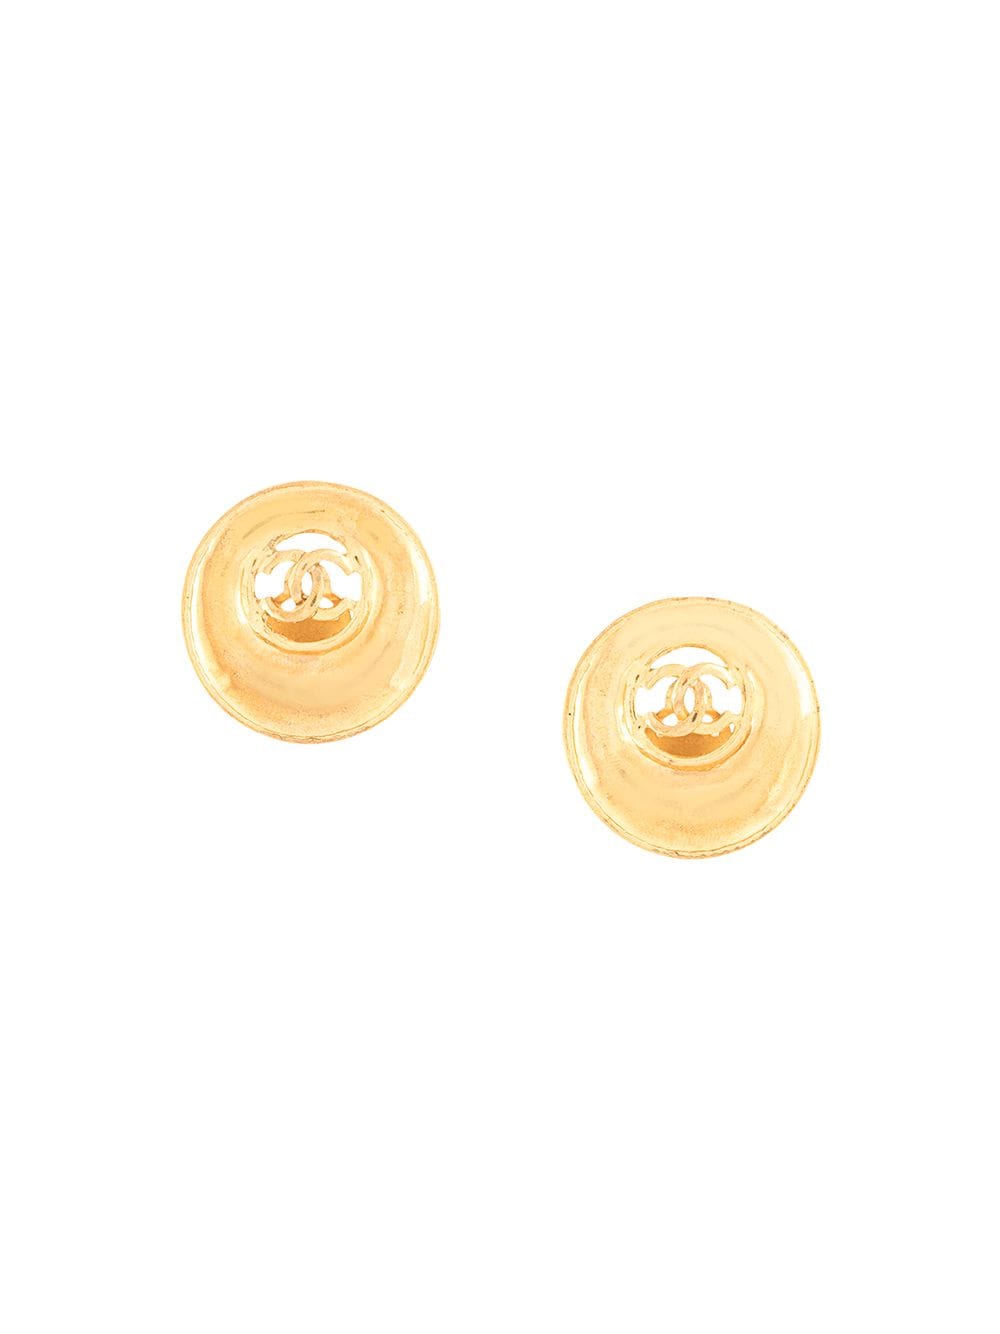 CHANEL Pre-Owned 1993 CC button earrings